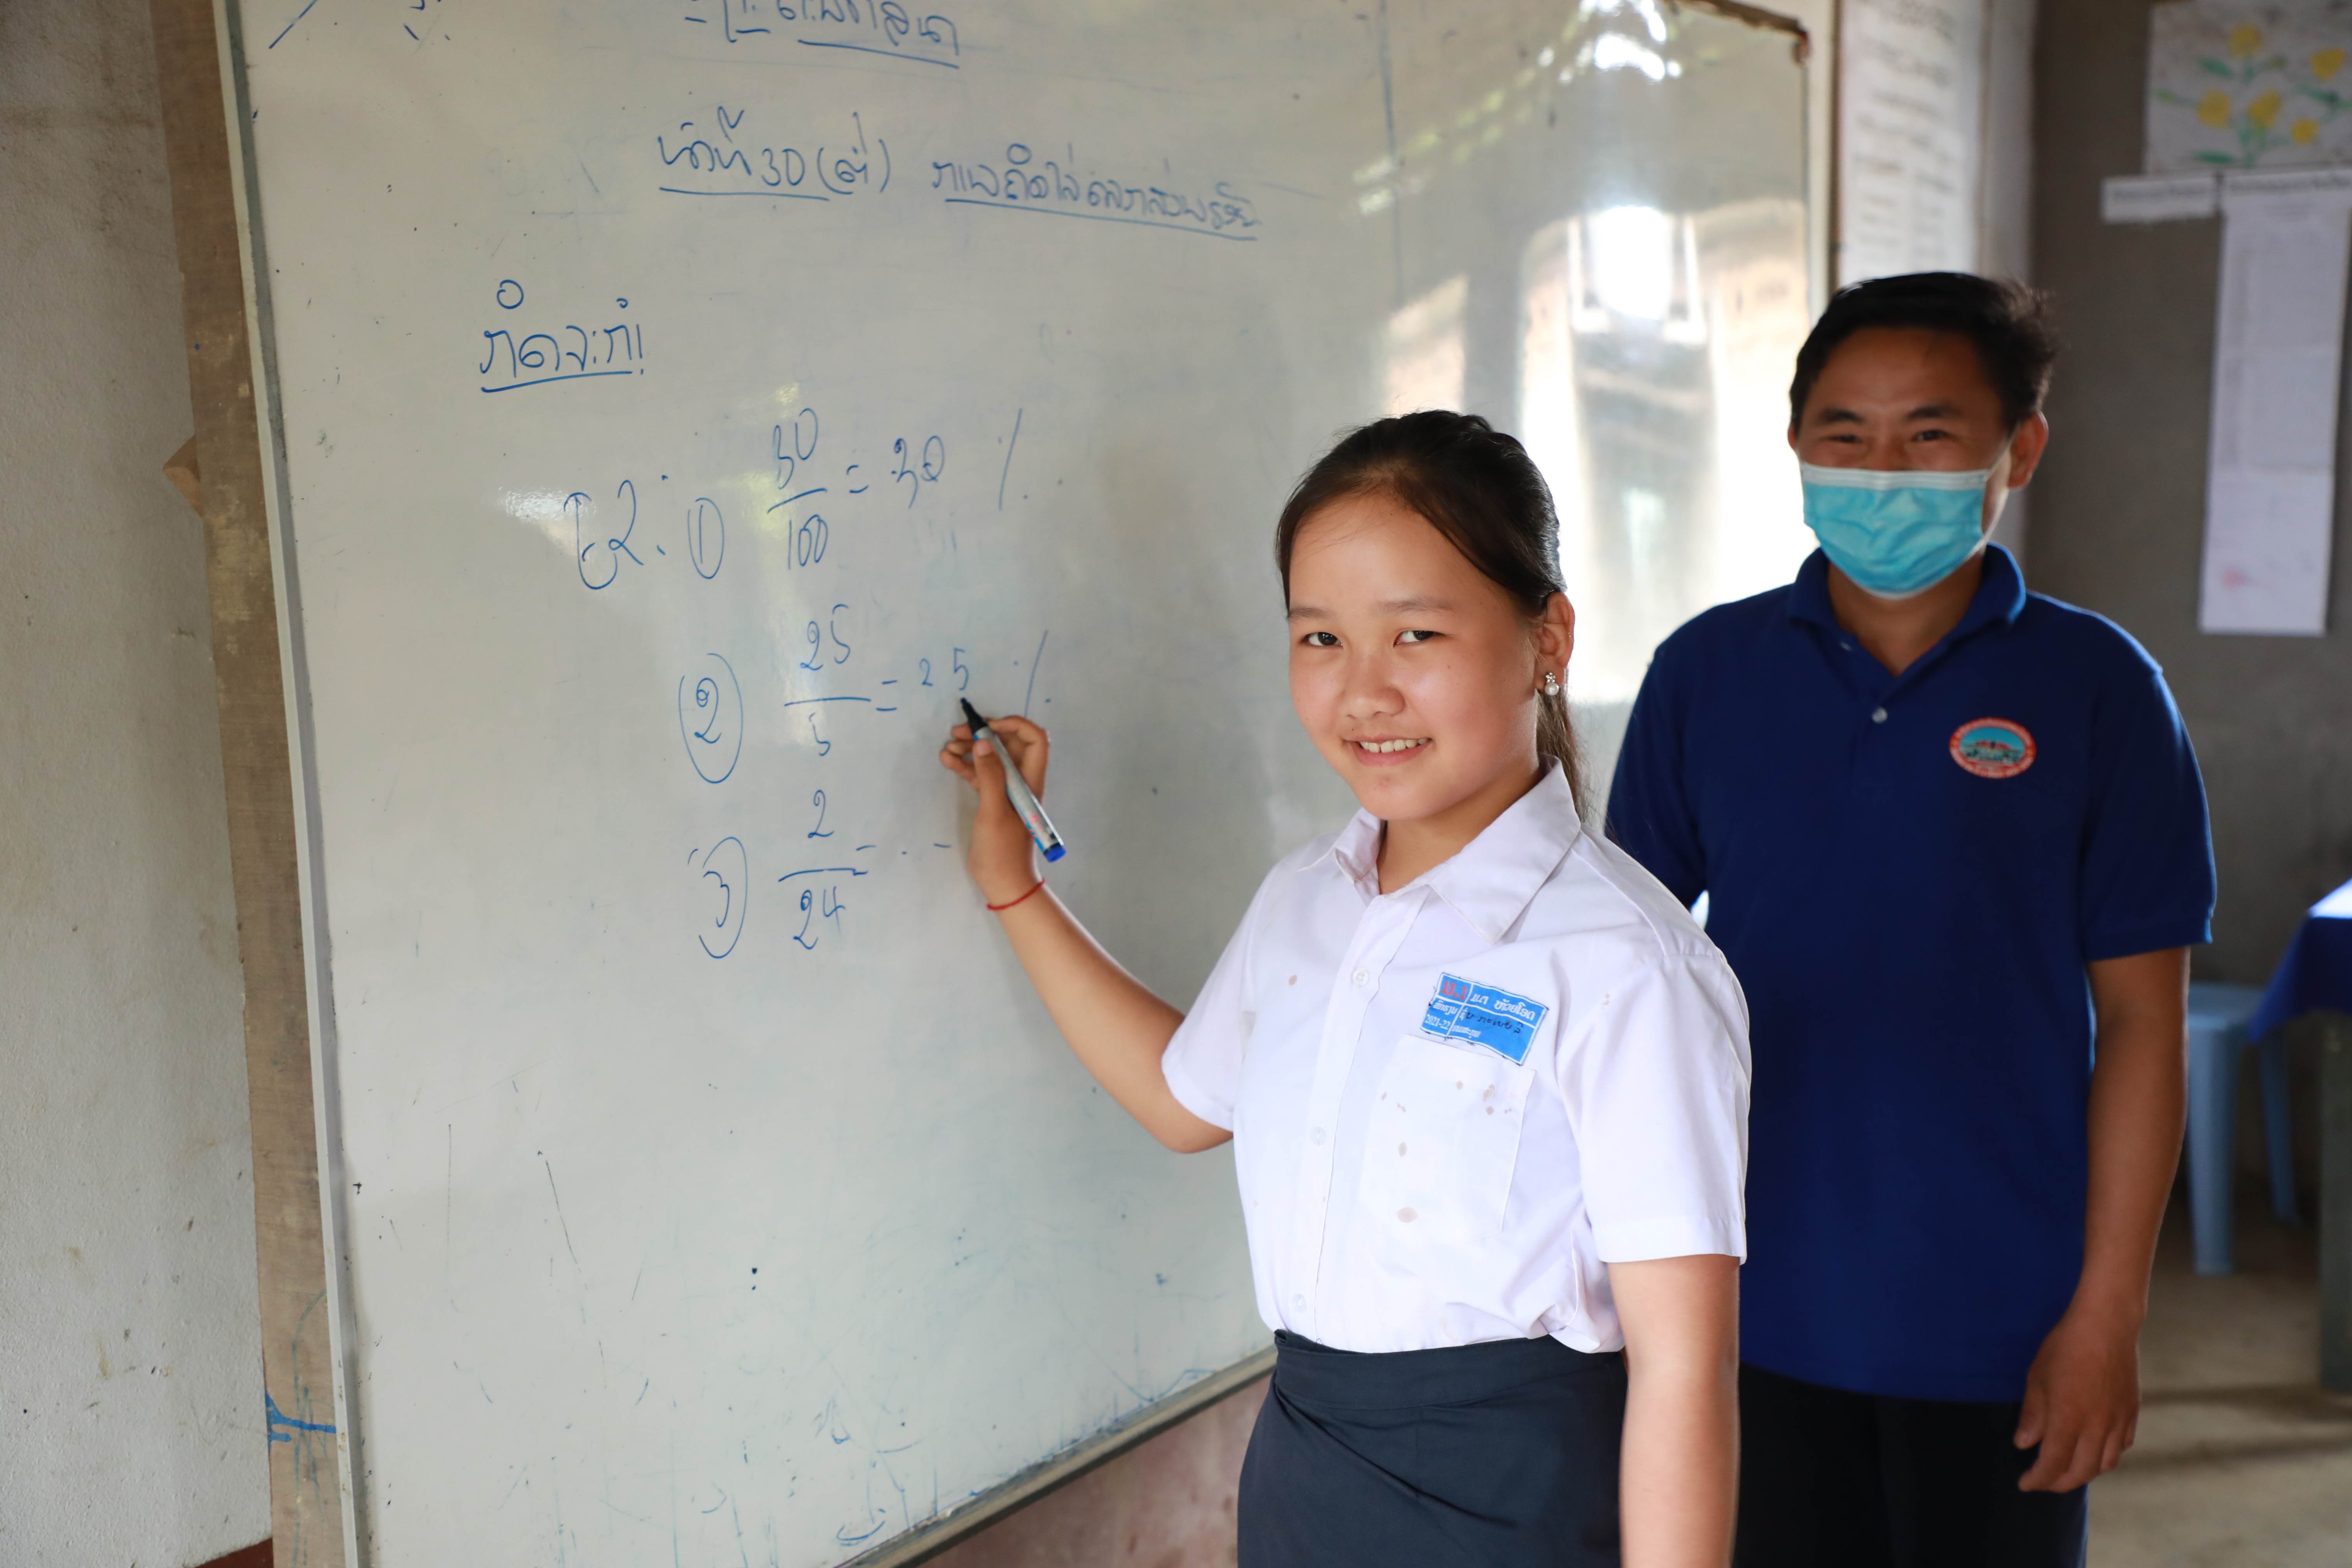 A girl student from Laos writing on a whiteboard at school while smiling at the camera. Her teacher supervises in the background while wearing a facemask.